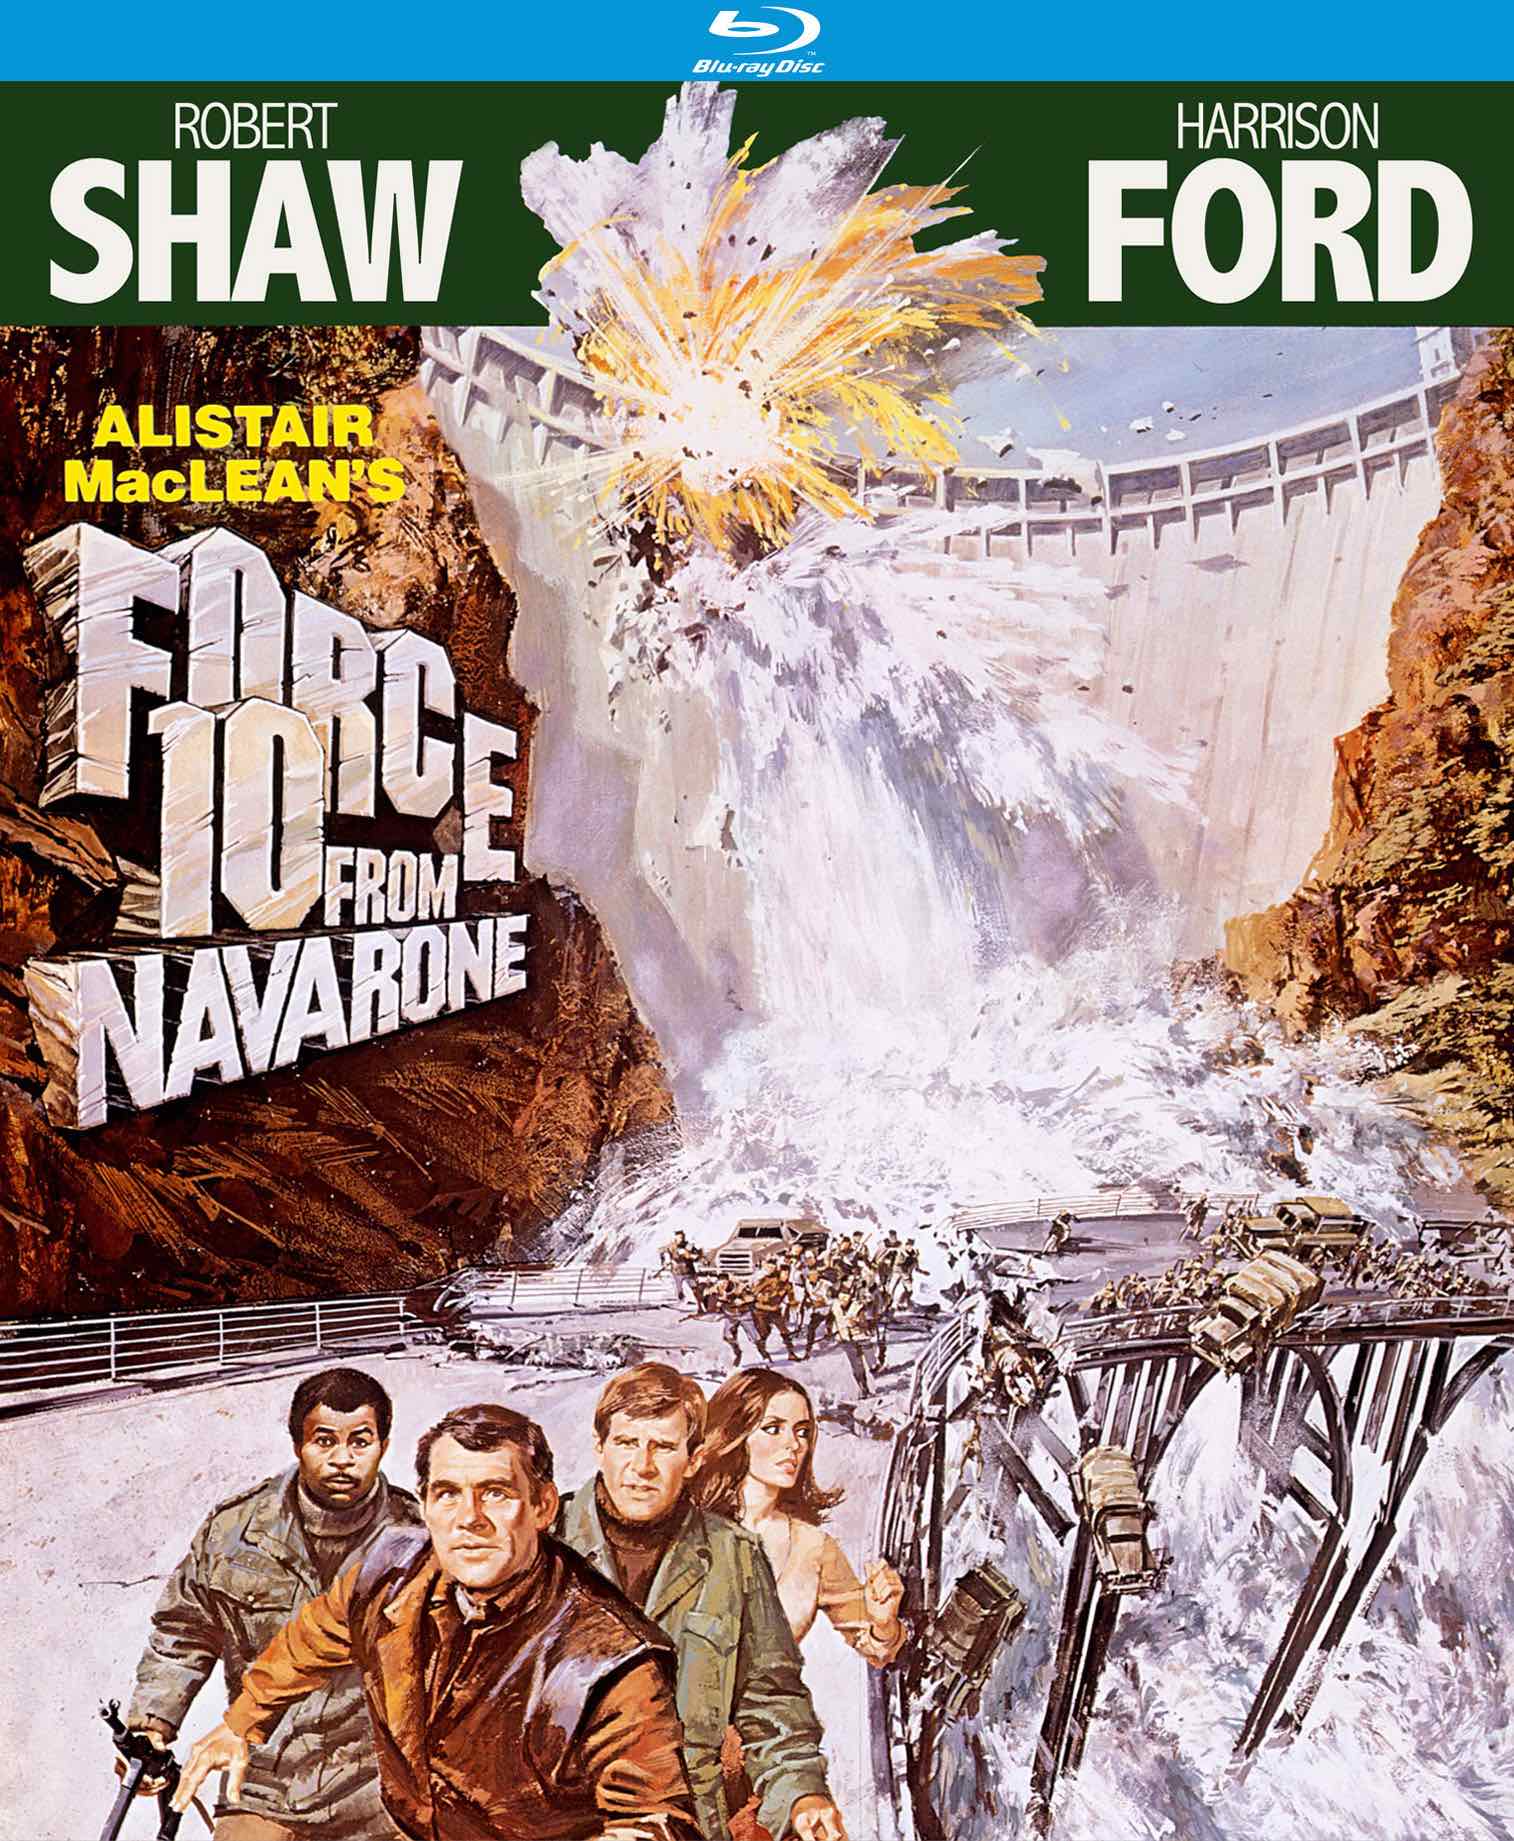 Force 10 from Navarone [Blu-ray] cover art